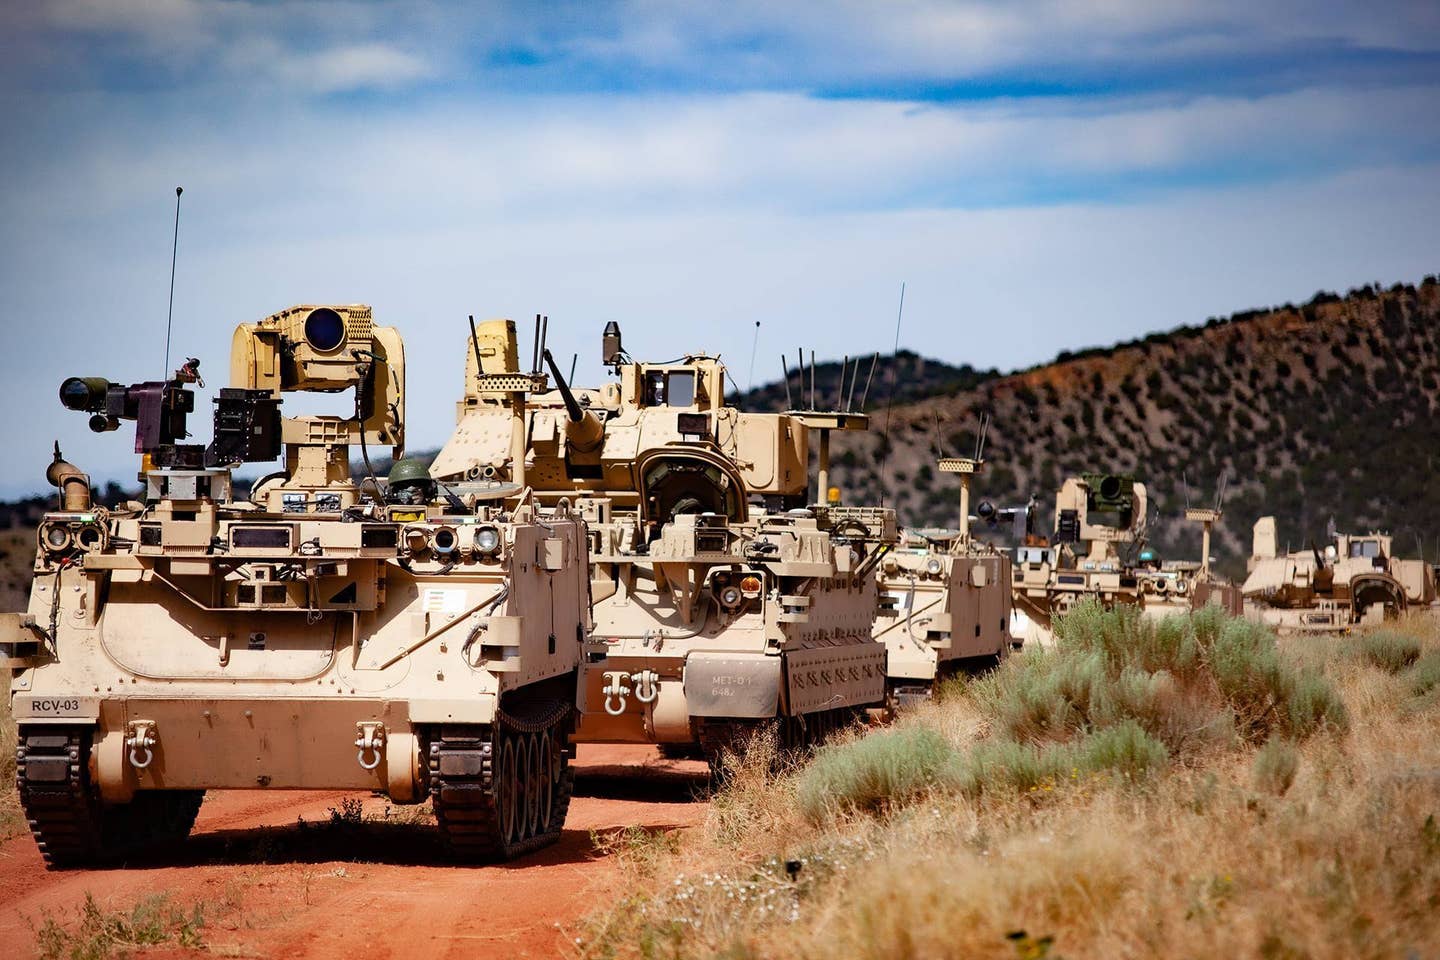 Modified Bradley Fighting Vehicles M113 tracked armored personnel carriers, or Robotic Combat Vehicles, were used to further develop the Manned Unmanned Teaming (MUM-T) concept at Fort Carson, Colorado in 2020. <em>U.S. Army photo by Jerome Aliotta</em>